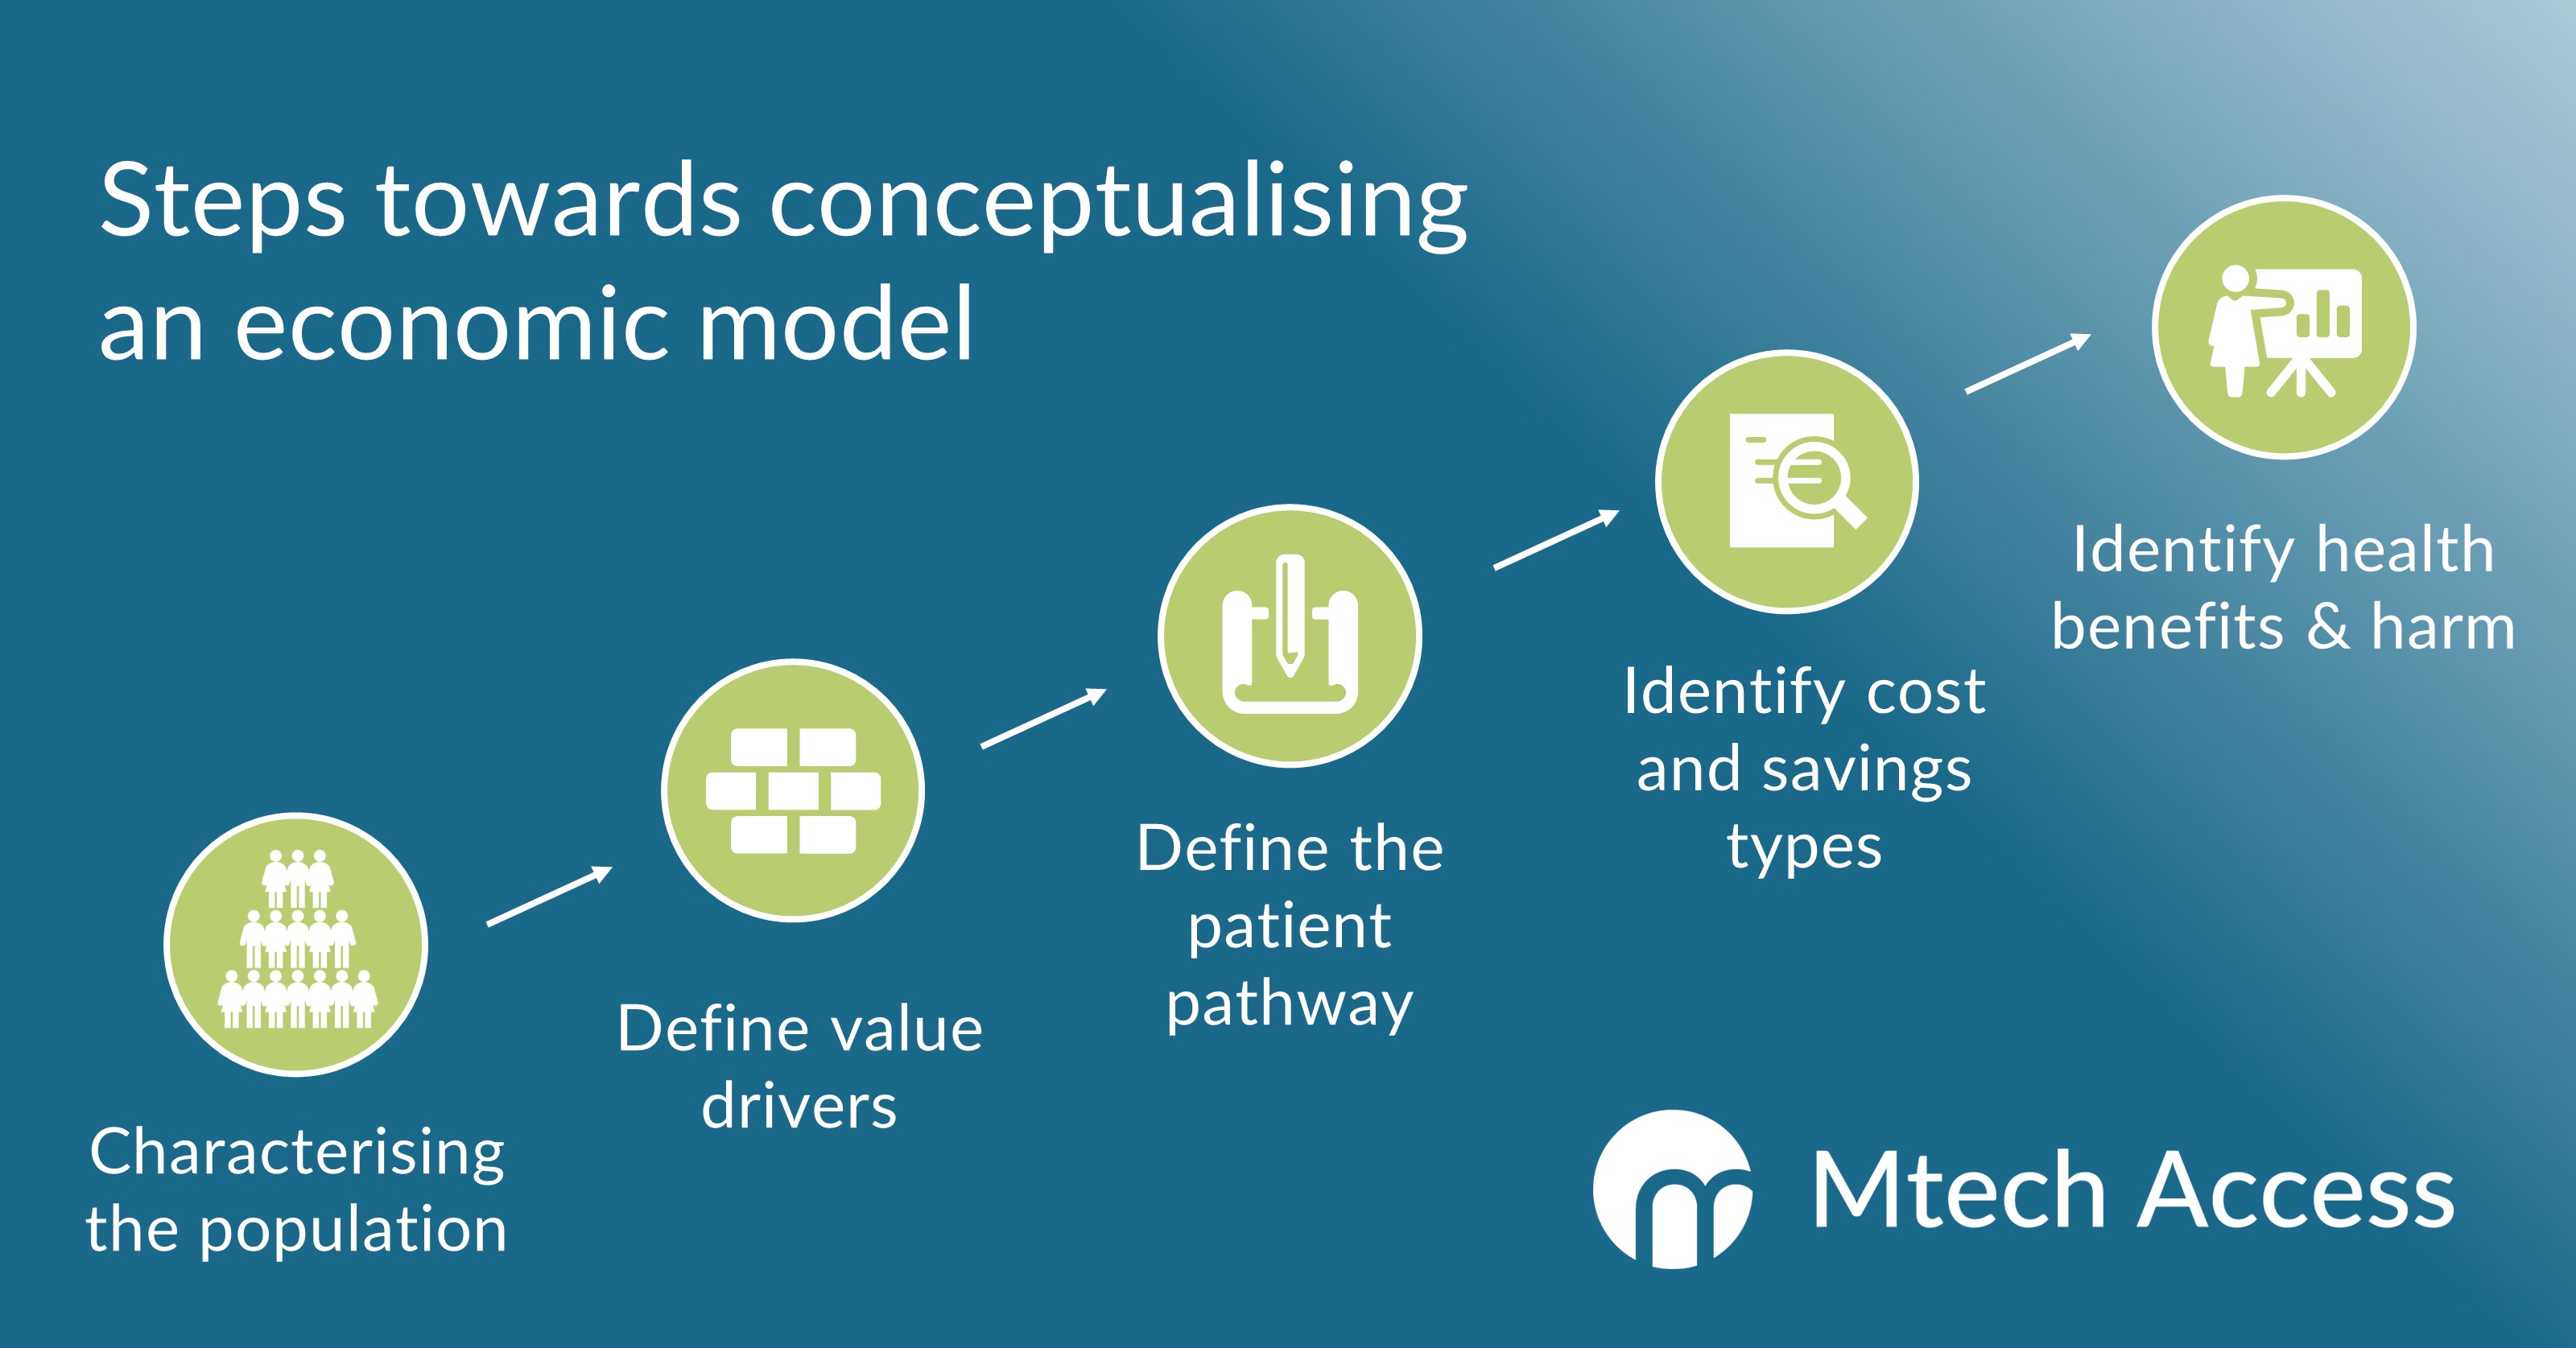 5 steps towards conceptualising an economic model: 1) charactering the population, 2) define value drivers, 3) define the patient pathway, 4) identify cost and savings types, 5) identify health benefits and harm